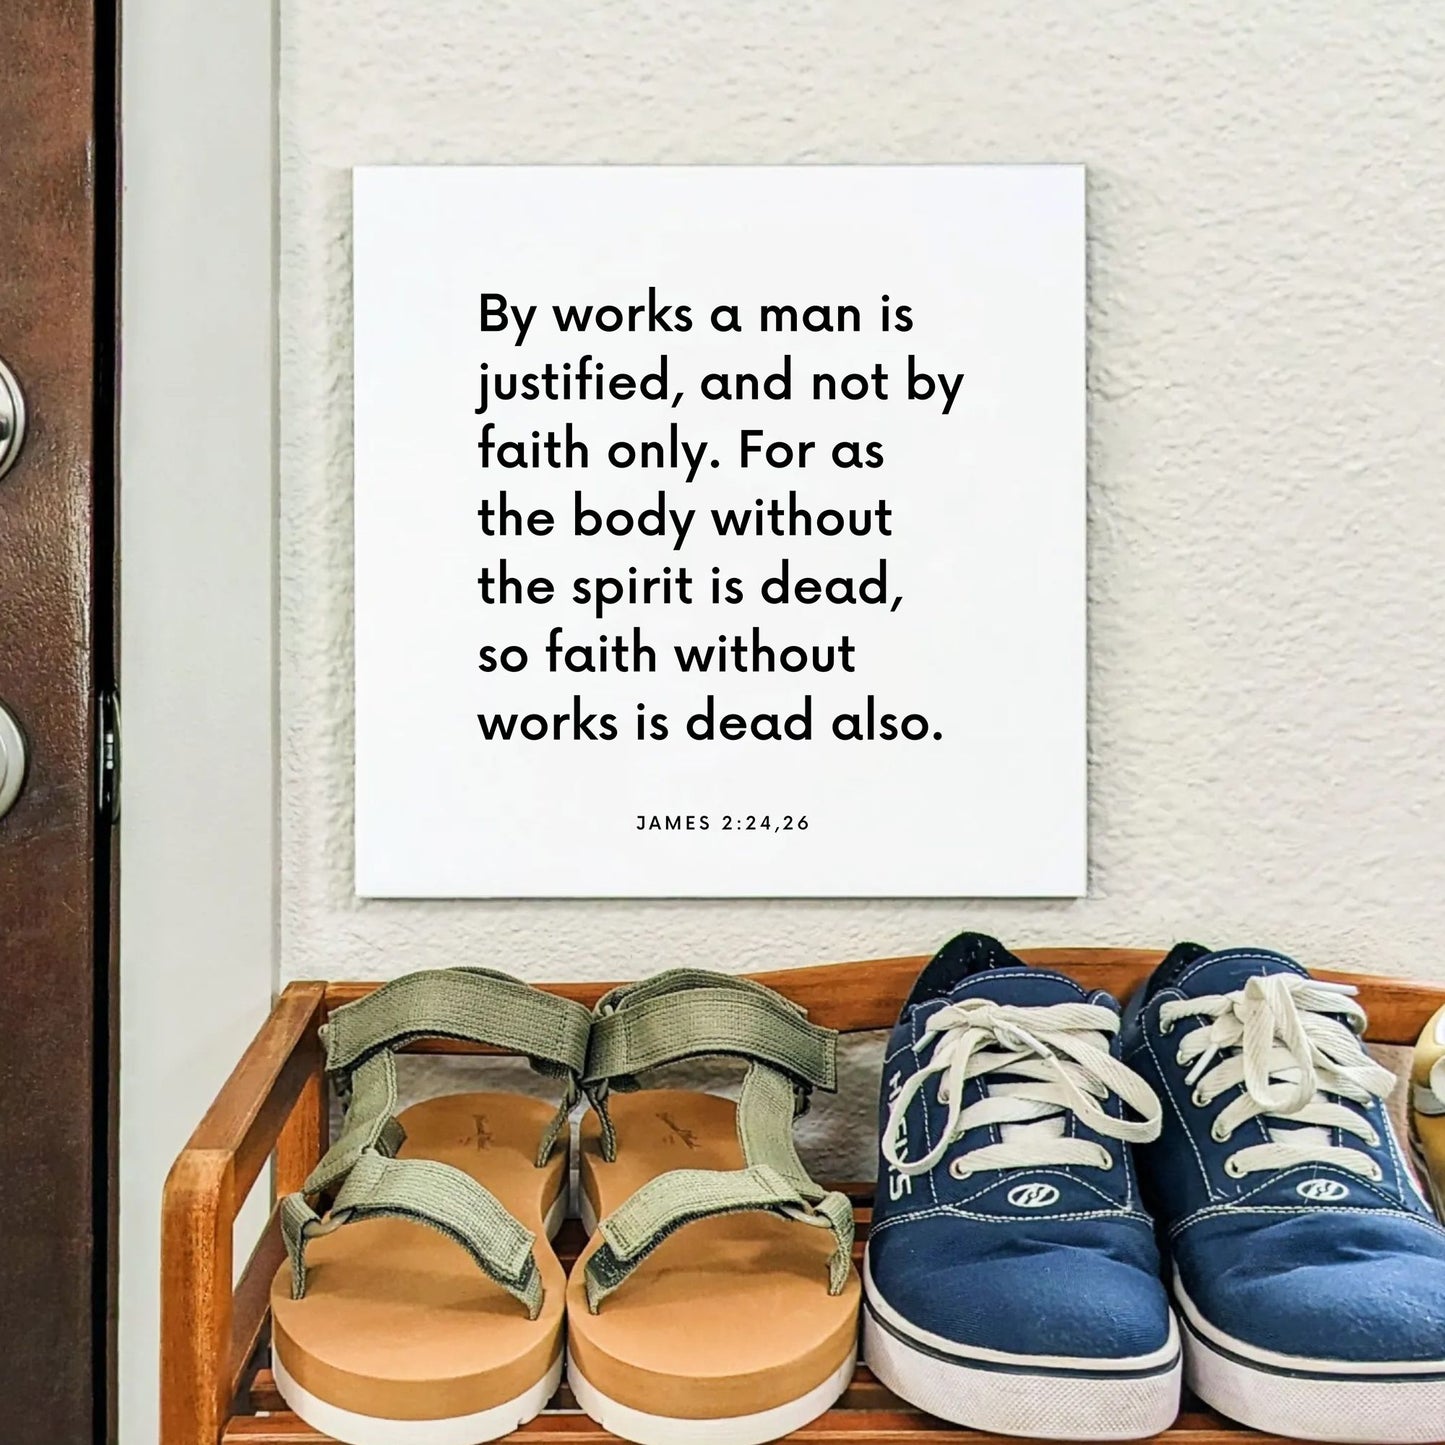 Shoes mouting of the scripture tile for James 2:24,26 - "By works a man is justified, and not by faith only"